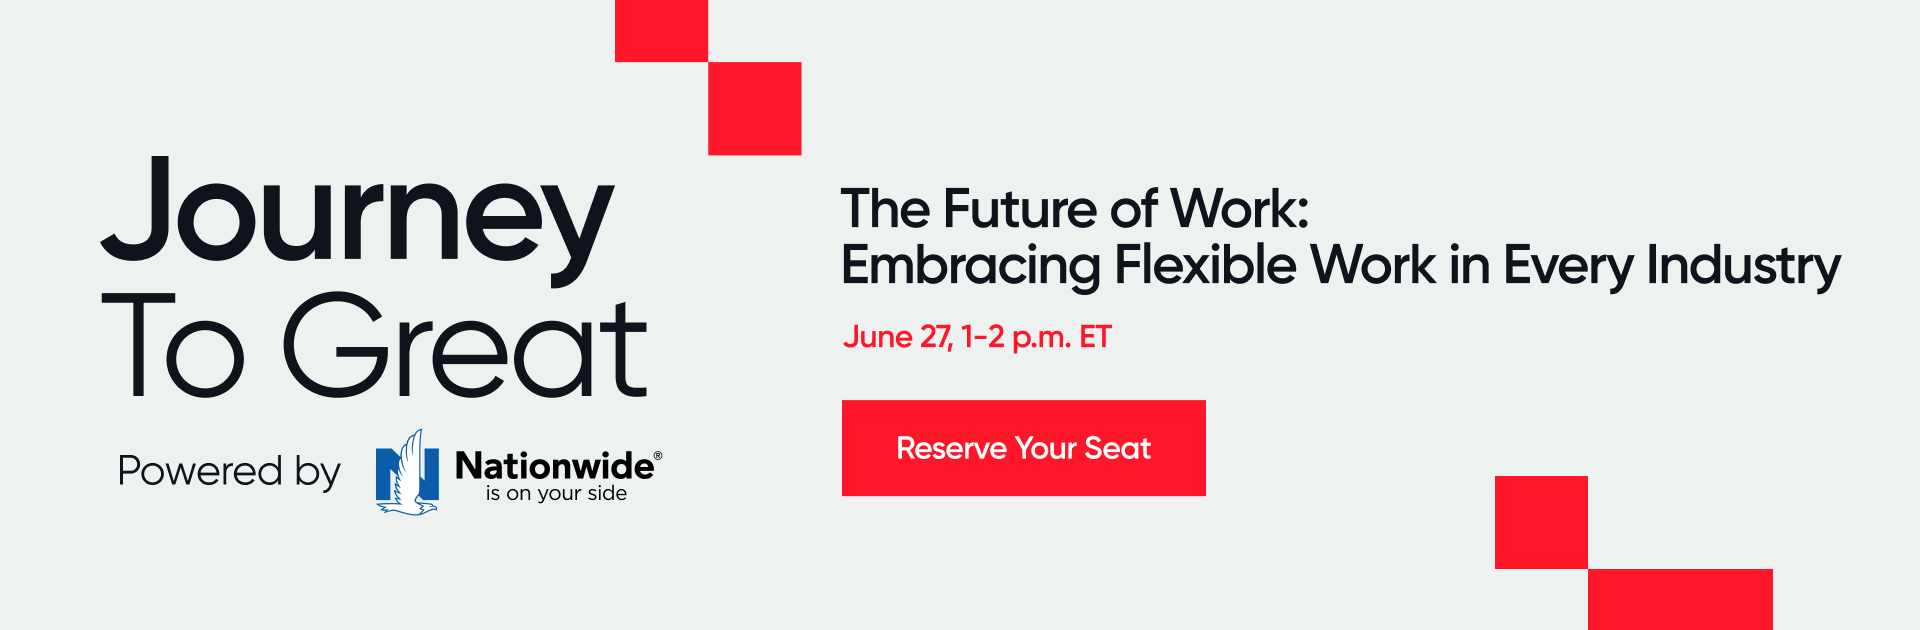 Webinar:The Future of Work: Embracing Flexible Work in Every Industry